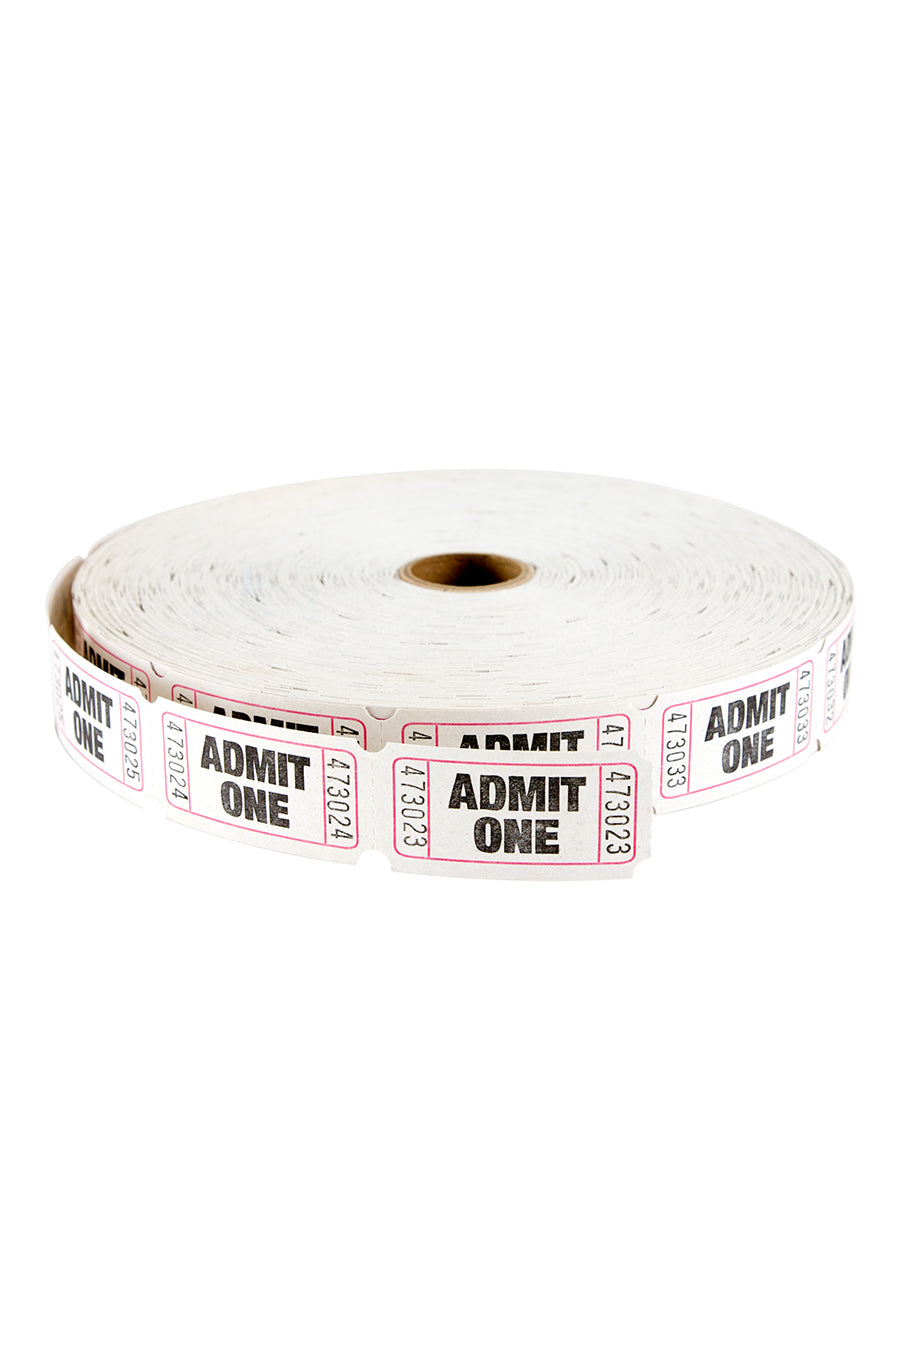 Single Ticket Roll, "Admit One", White, 2000 Tickets/Roll